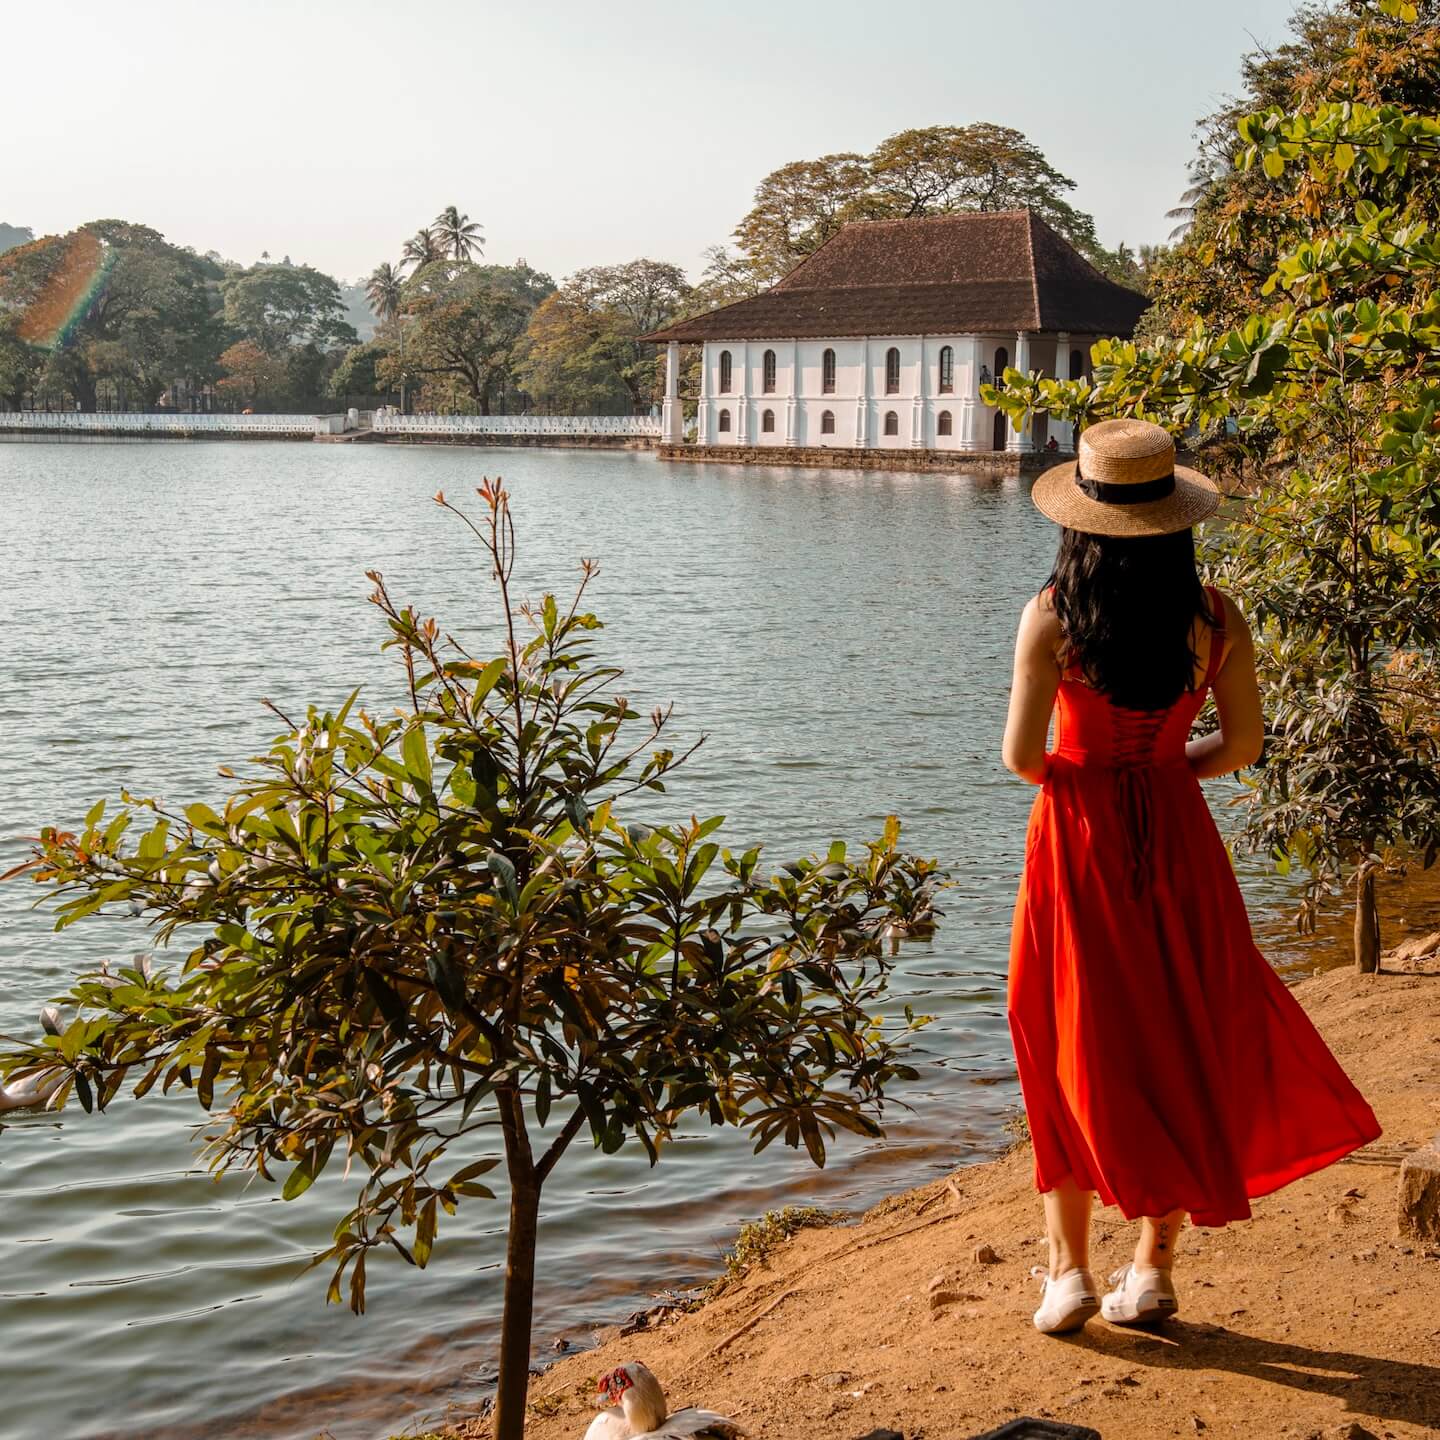 Stella with red dress at the Kandy Lake